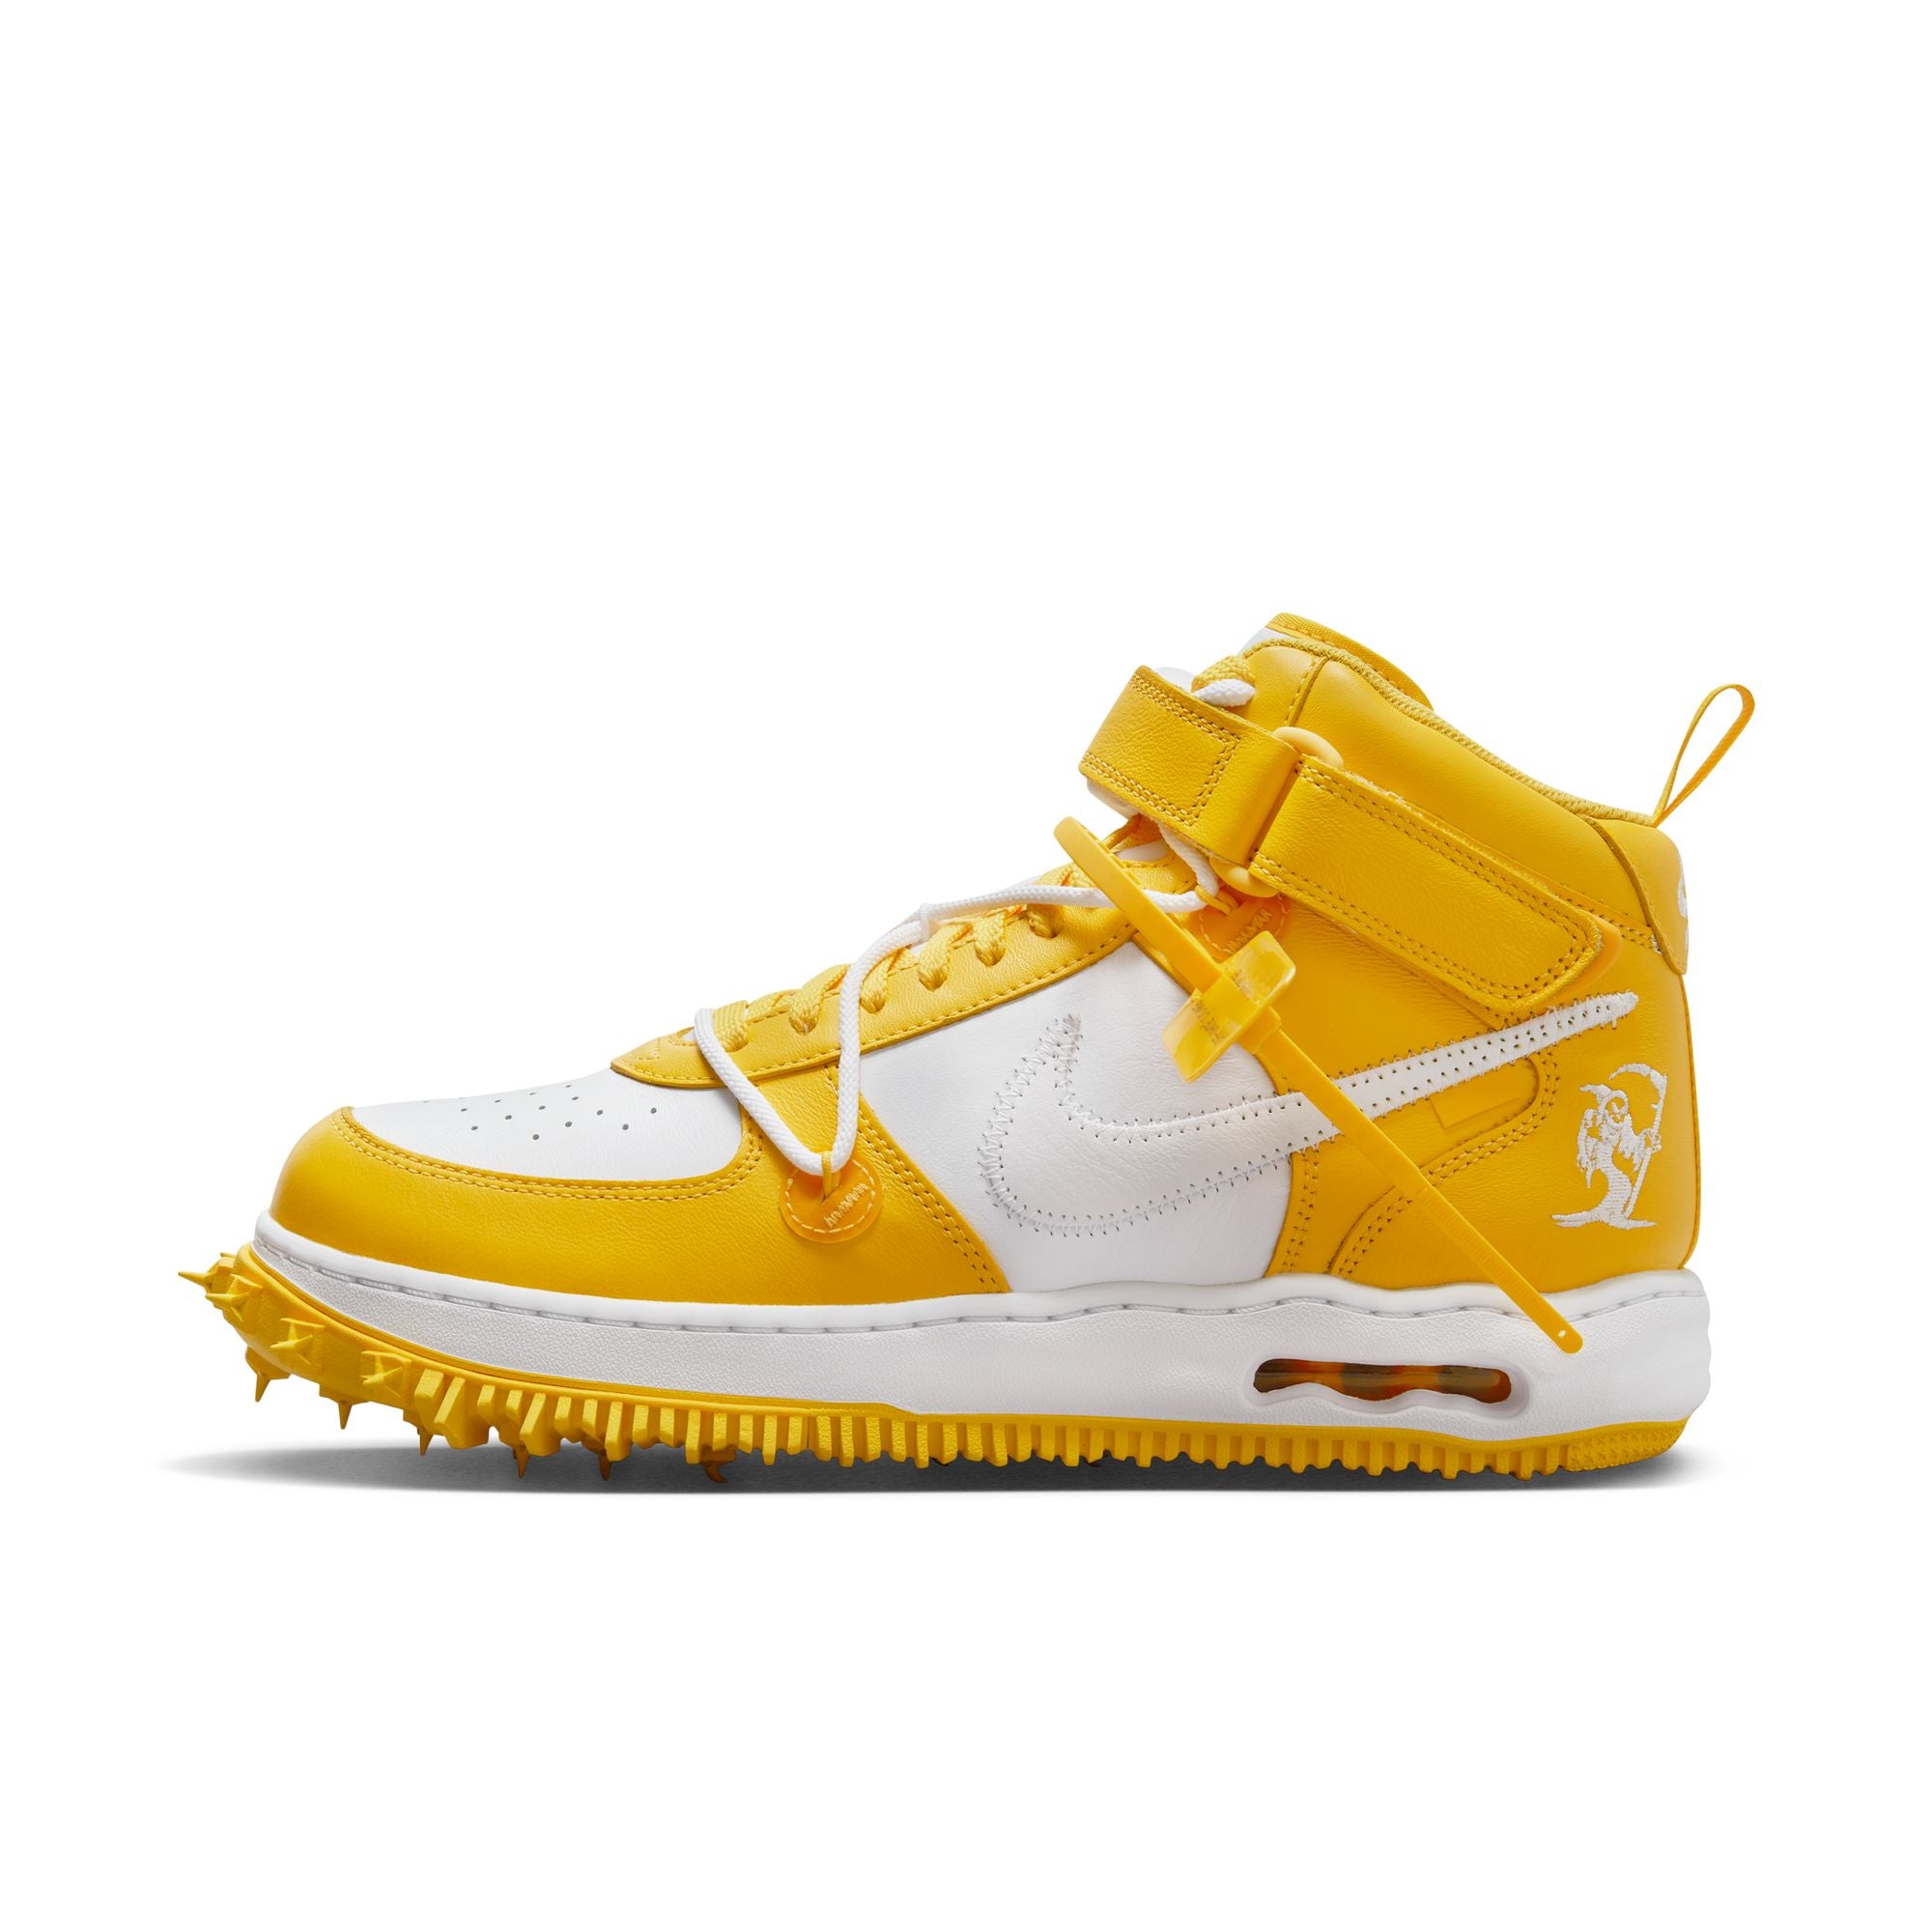 NIKE - Air Force 1 Mid Sp Lthr - (White/White-Varsity Maize) view 4